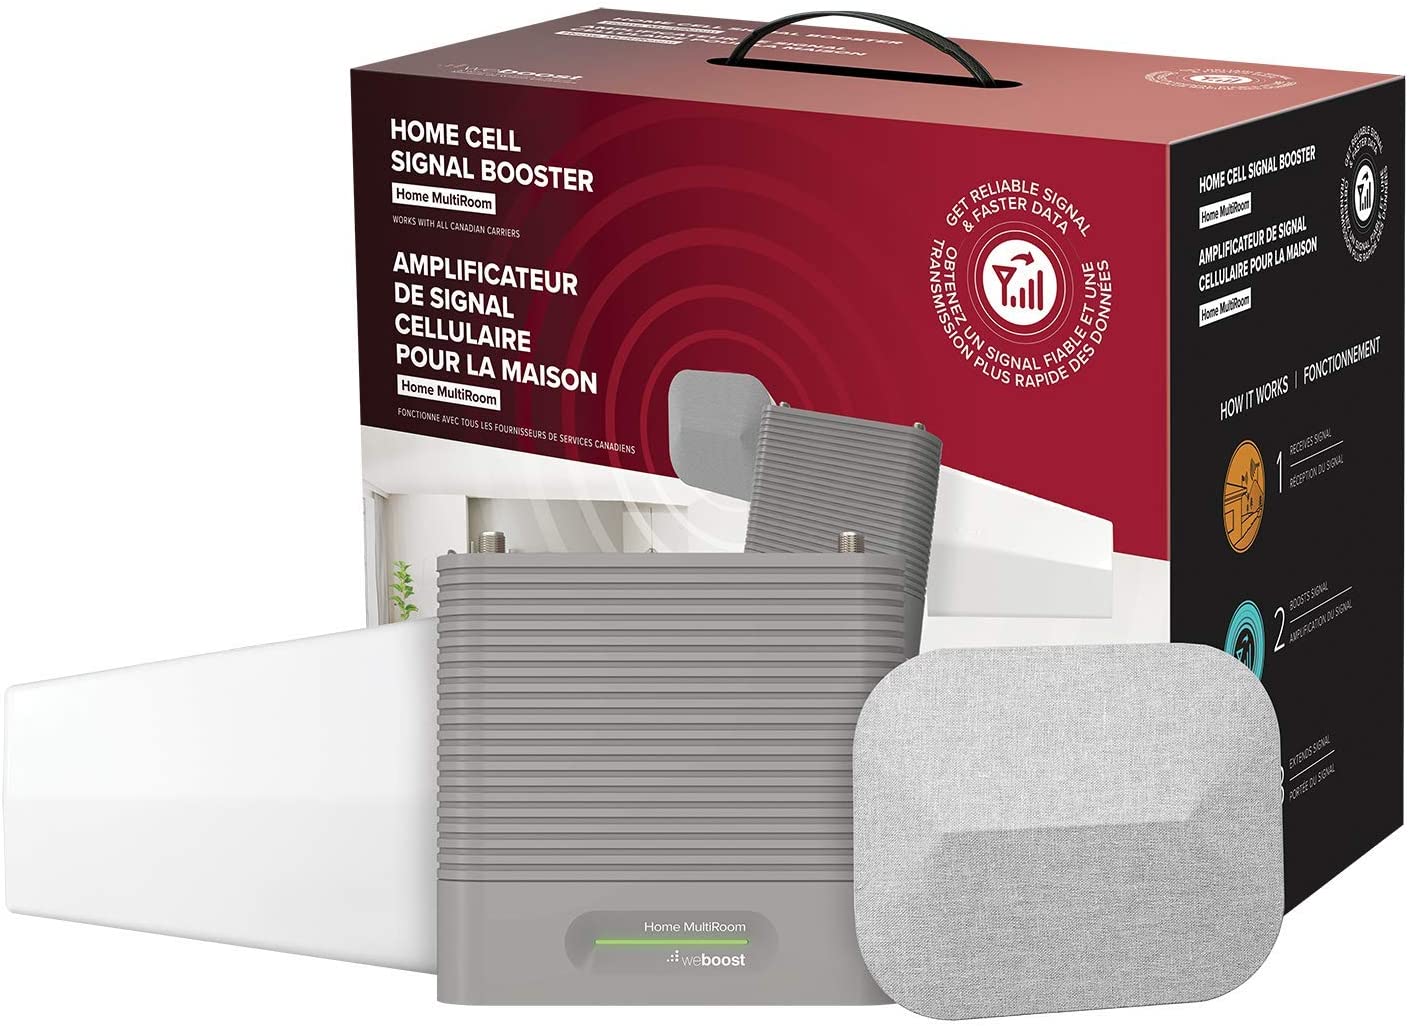 weBoost Home MultiRoom (650144) Cell Signal Booster Kit | Up to 5,000 sq ft | All Canadian Carriers - Bell, Rogers, Telus | ISED Approved